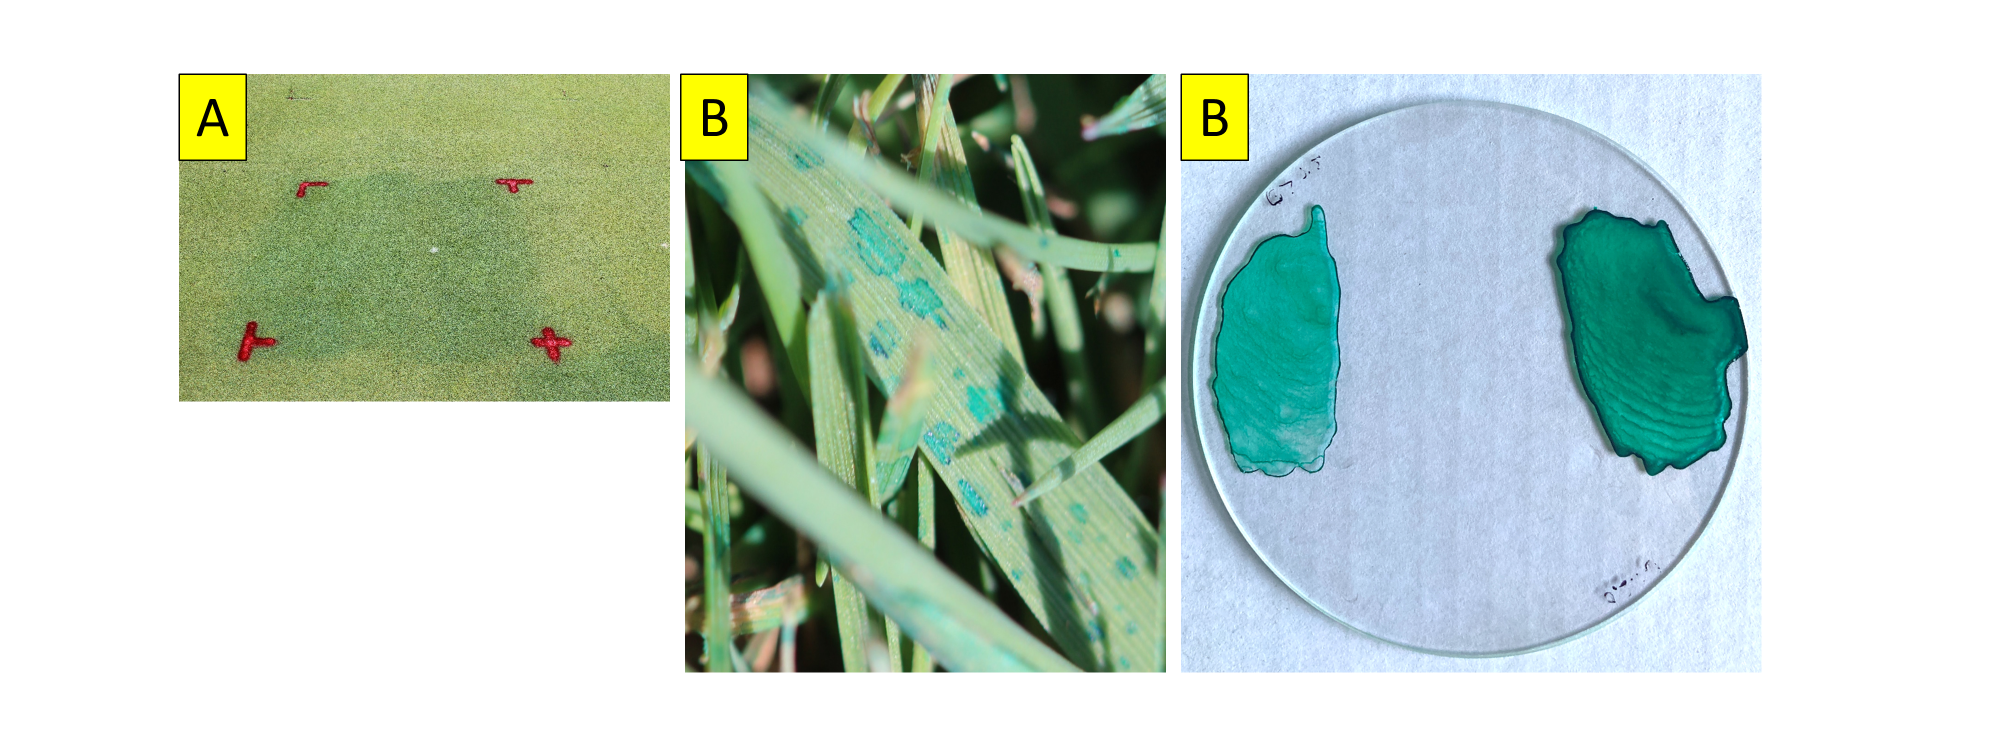 3 images - the first a square of pigment-treated creeping bentgrass, grass leaves with spots of green pigment, and spots of green pigment on a round piece of glass